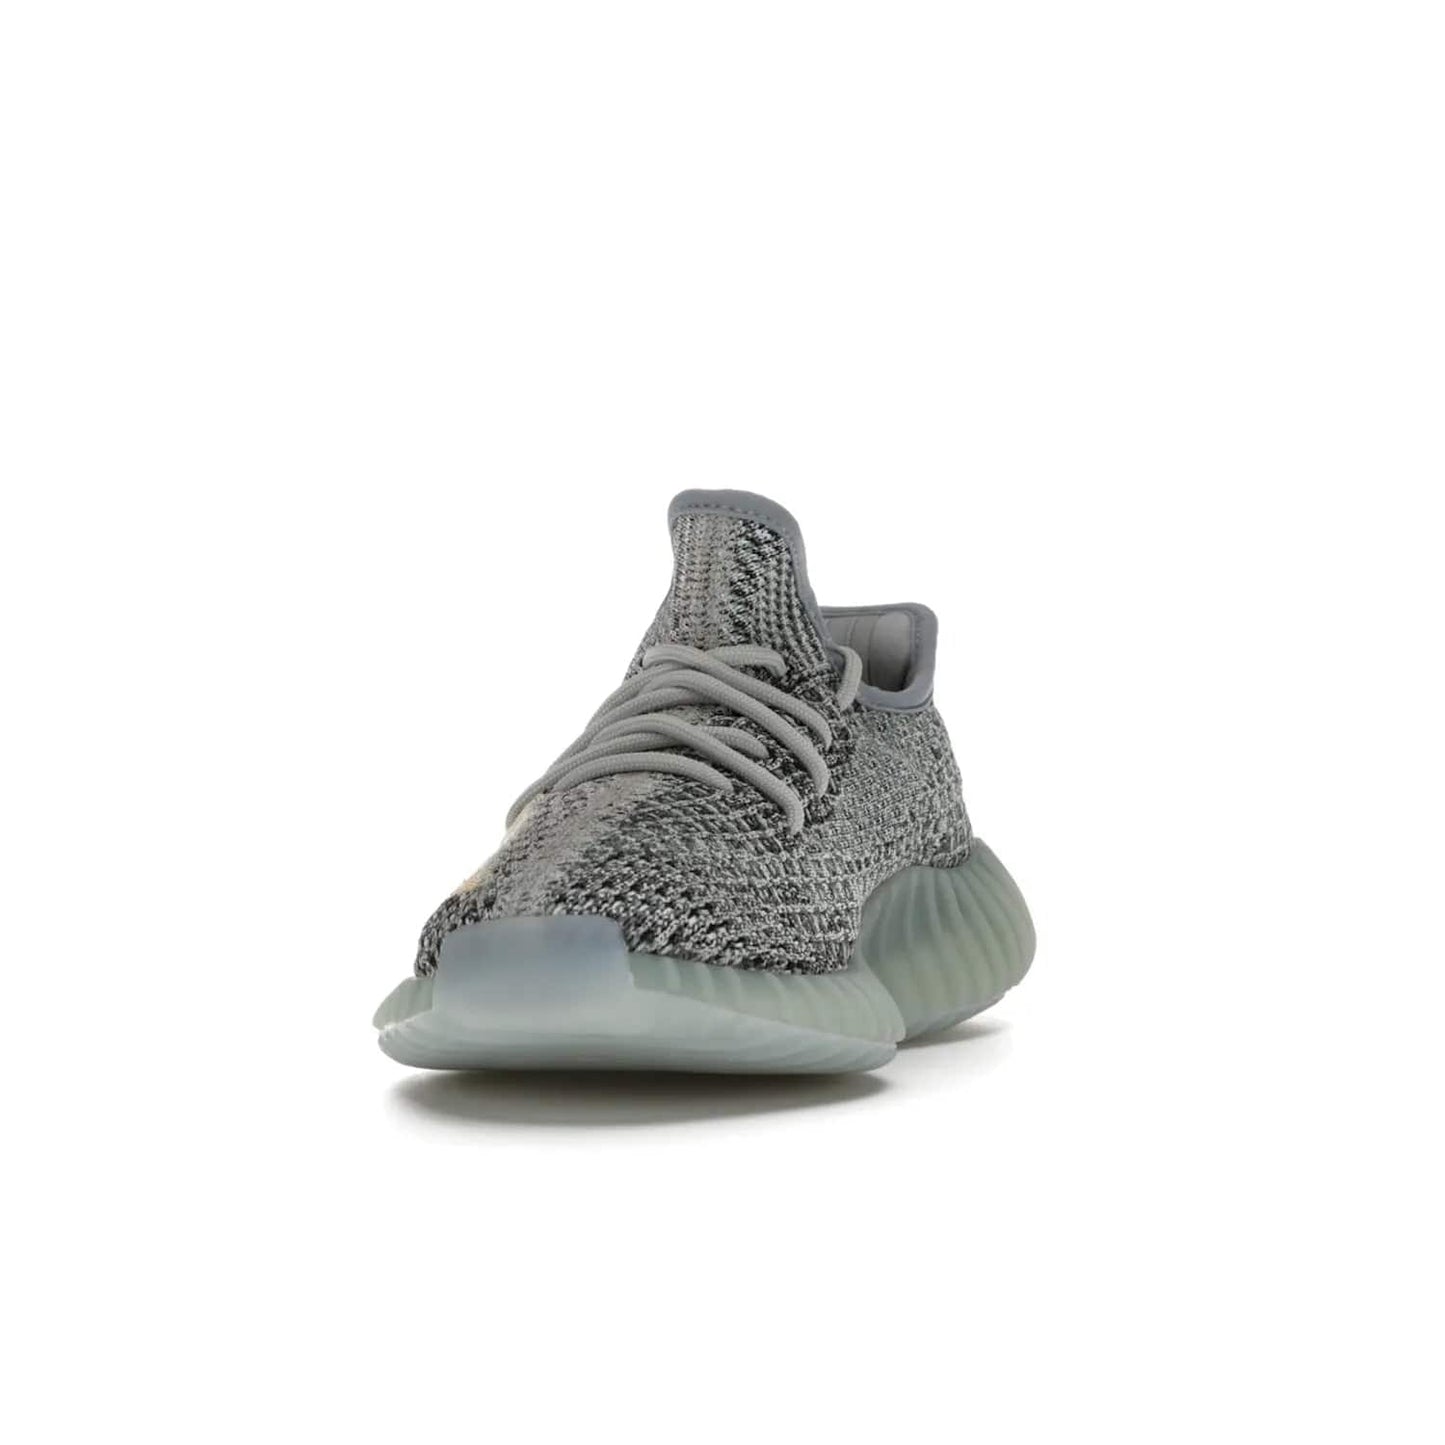 adidas Yeezy Boost 350 V2 Ash Blue - Image 12 - Only at www.BallersClubKickz.com - Must-have design made of engineered primeknit upper, comfortable sock-like upper and full-length Boost midsole, and semi-translucent rubber cage for added durability and style. The adidas Yeezy Boost 350 V2 Ash Blue blends timeless colors and comfort.